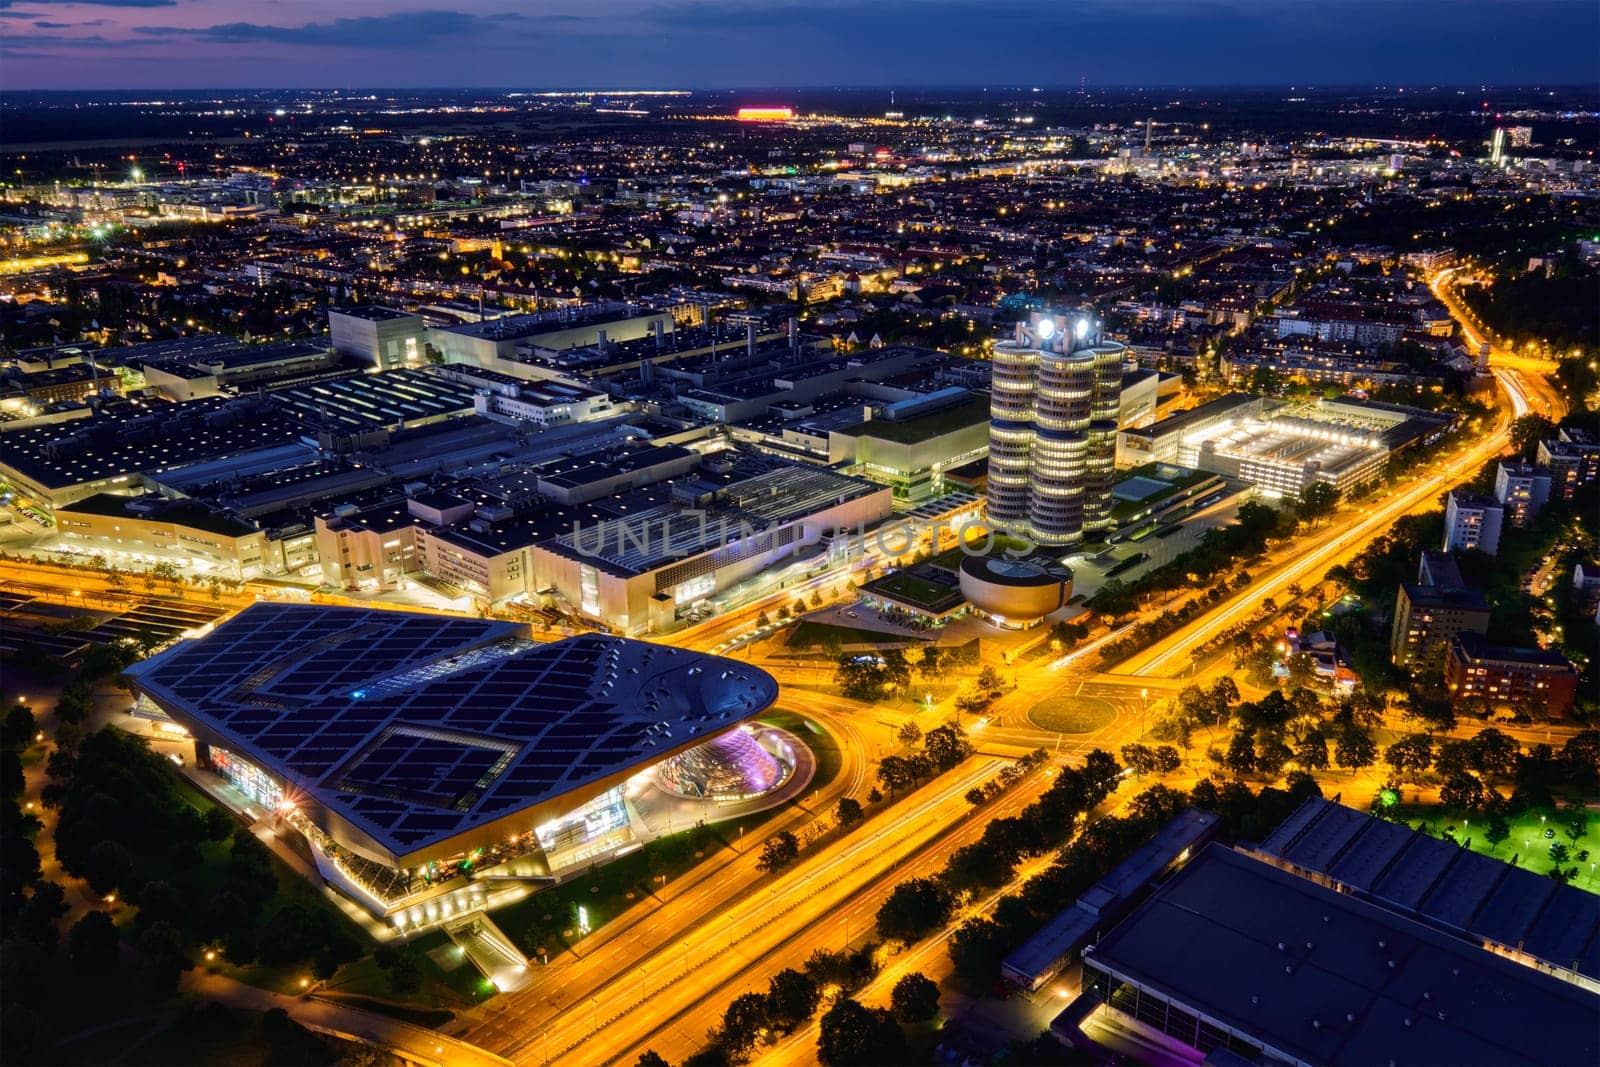 MUNICH, GERMANY - JULY 08, 2018: Aerial view of BMW Museum and BWM Welt and factory and Munich from Olympic Tower illuminated at night. BMW is a famous German luxury car automaker.